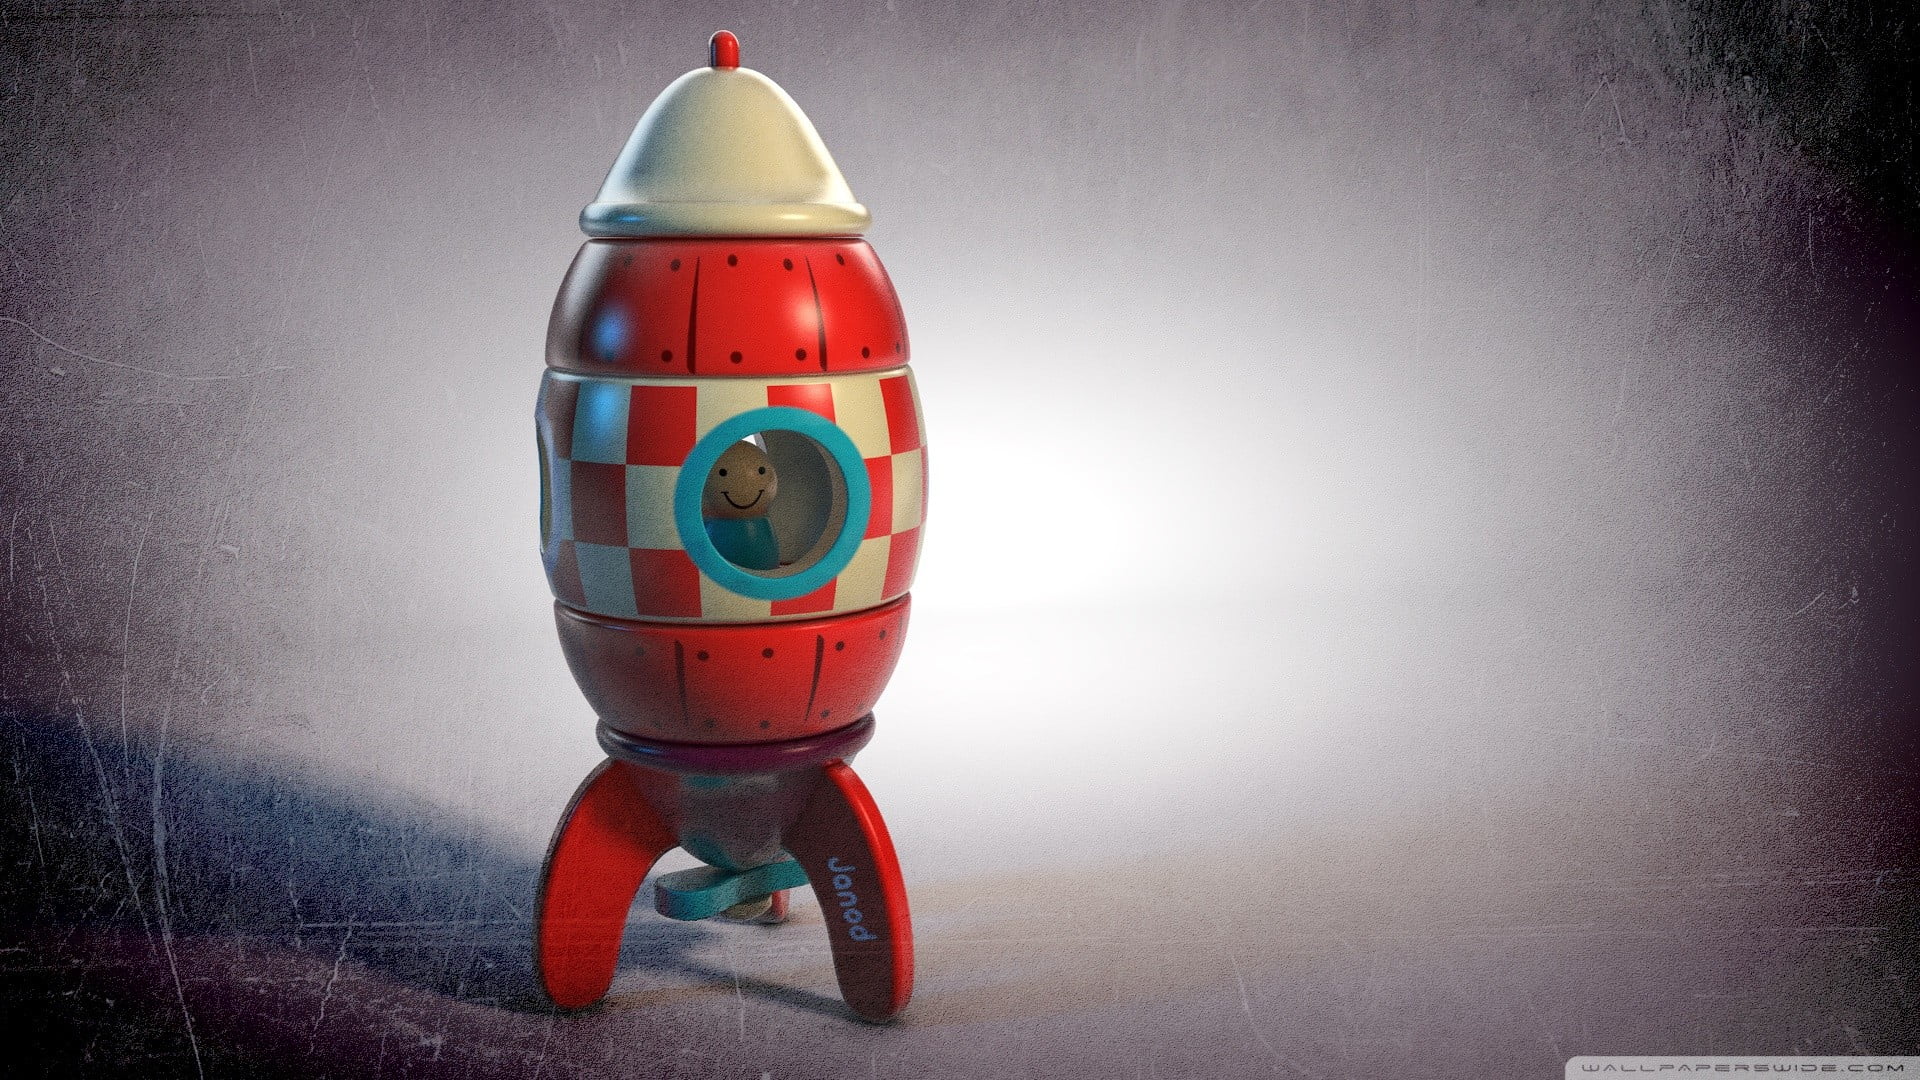 red rocket toy, digital art, indoors, single object, no people